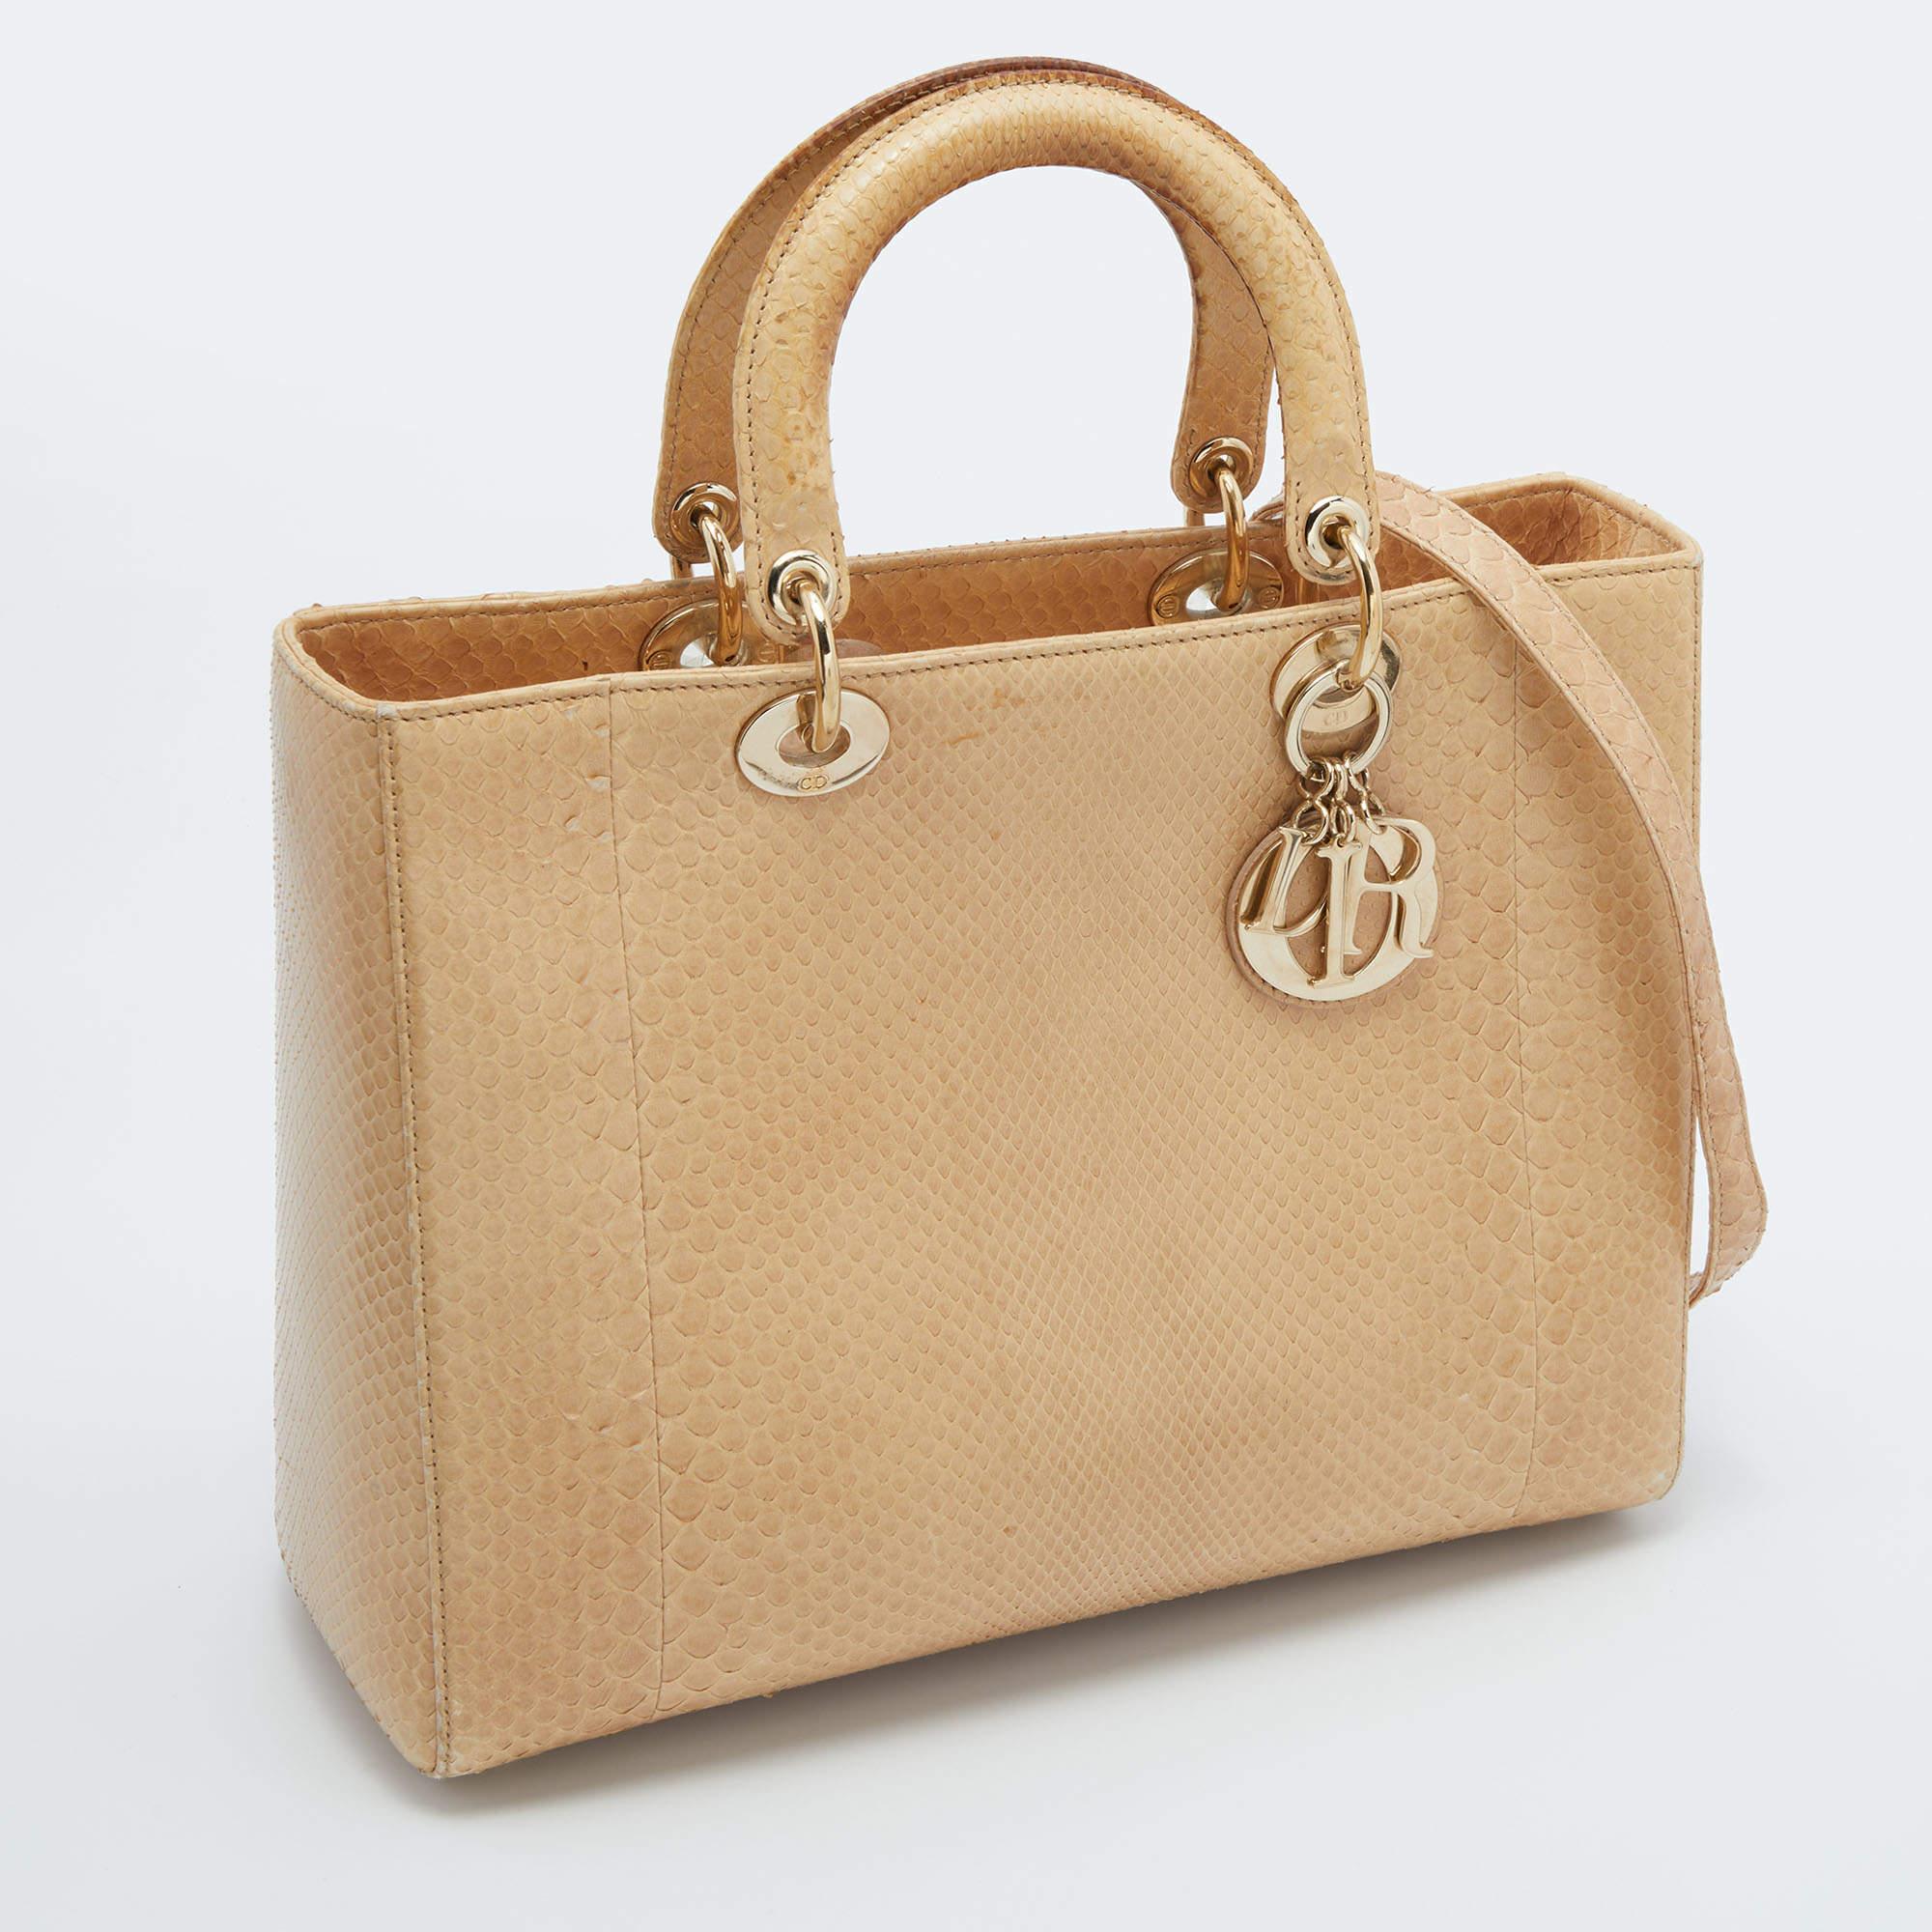 A timeless status and great design mark the Lady Dior tote. It is an iconic bag that people continue to invest in to this day. We have here this classic beauty crafted from beige python leather. The bag has a lined interior for your essentials. This